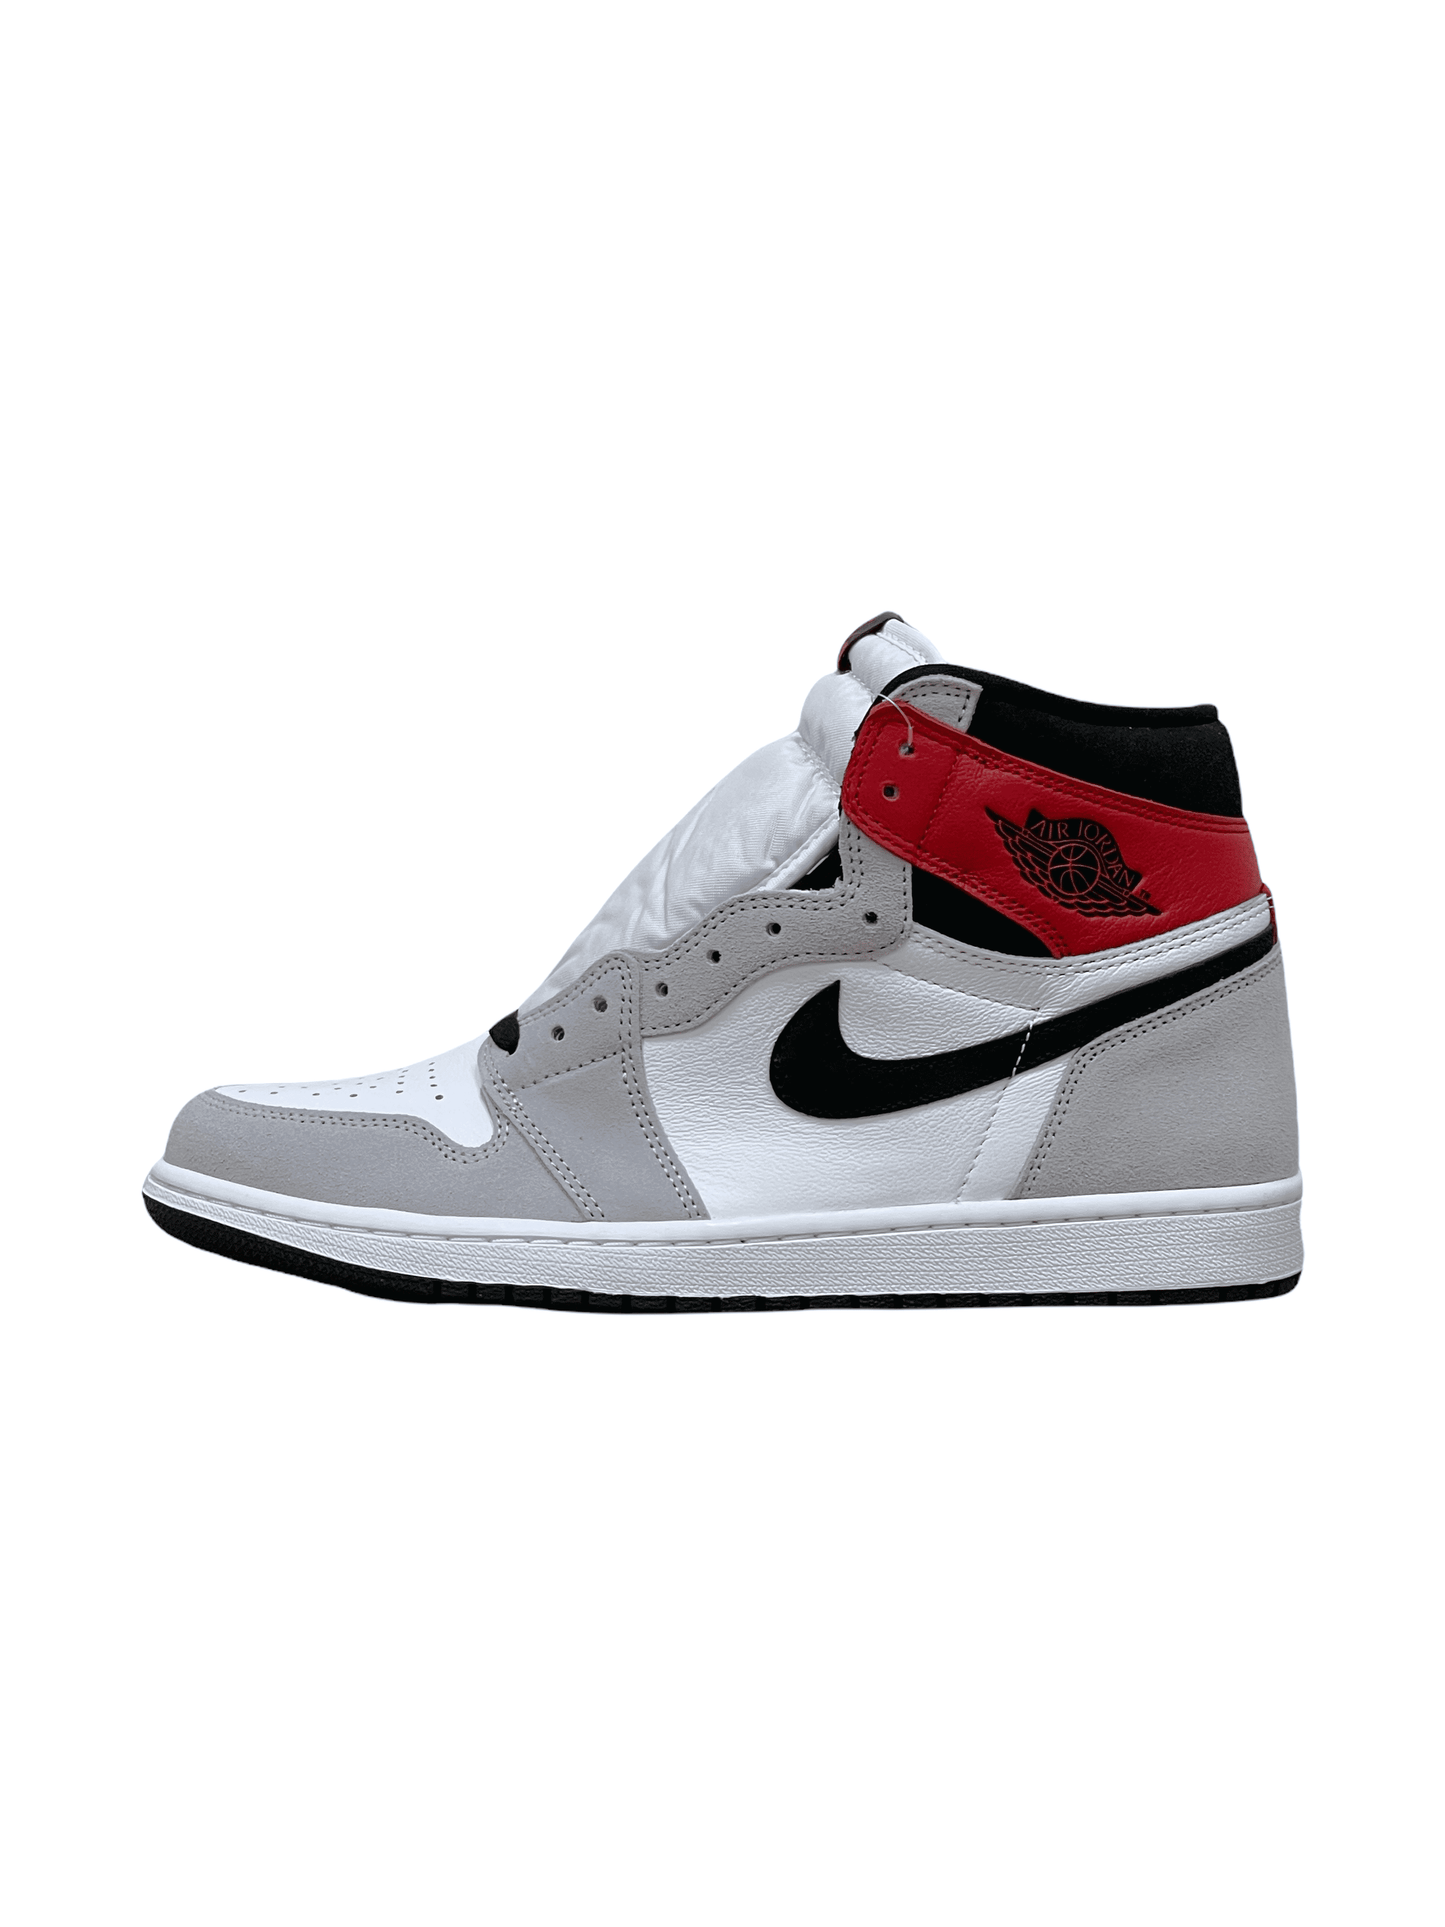 Nike Air Jordan 1 Retro High Light Smoke Grey Sneakers - Genuine Design Luxury Consignment for Men. New & Pre-Owned Clothing, Shoes, & Accessories. Calgary, Canada